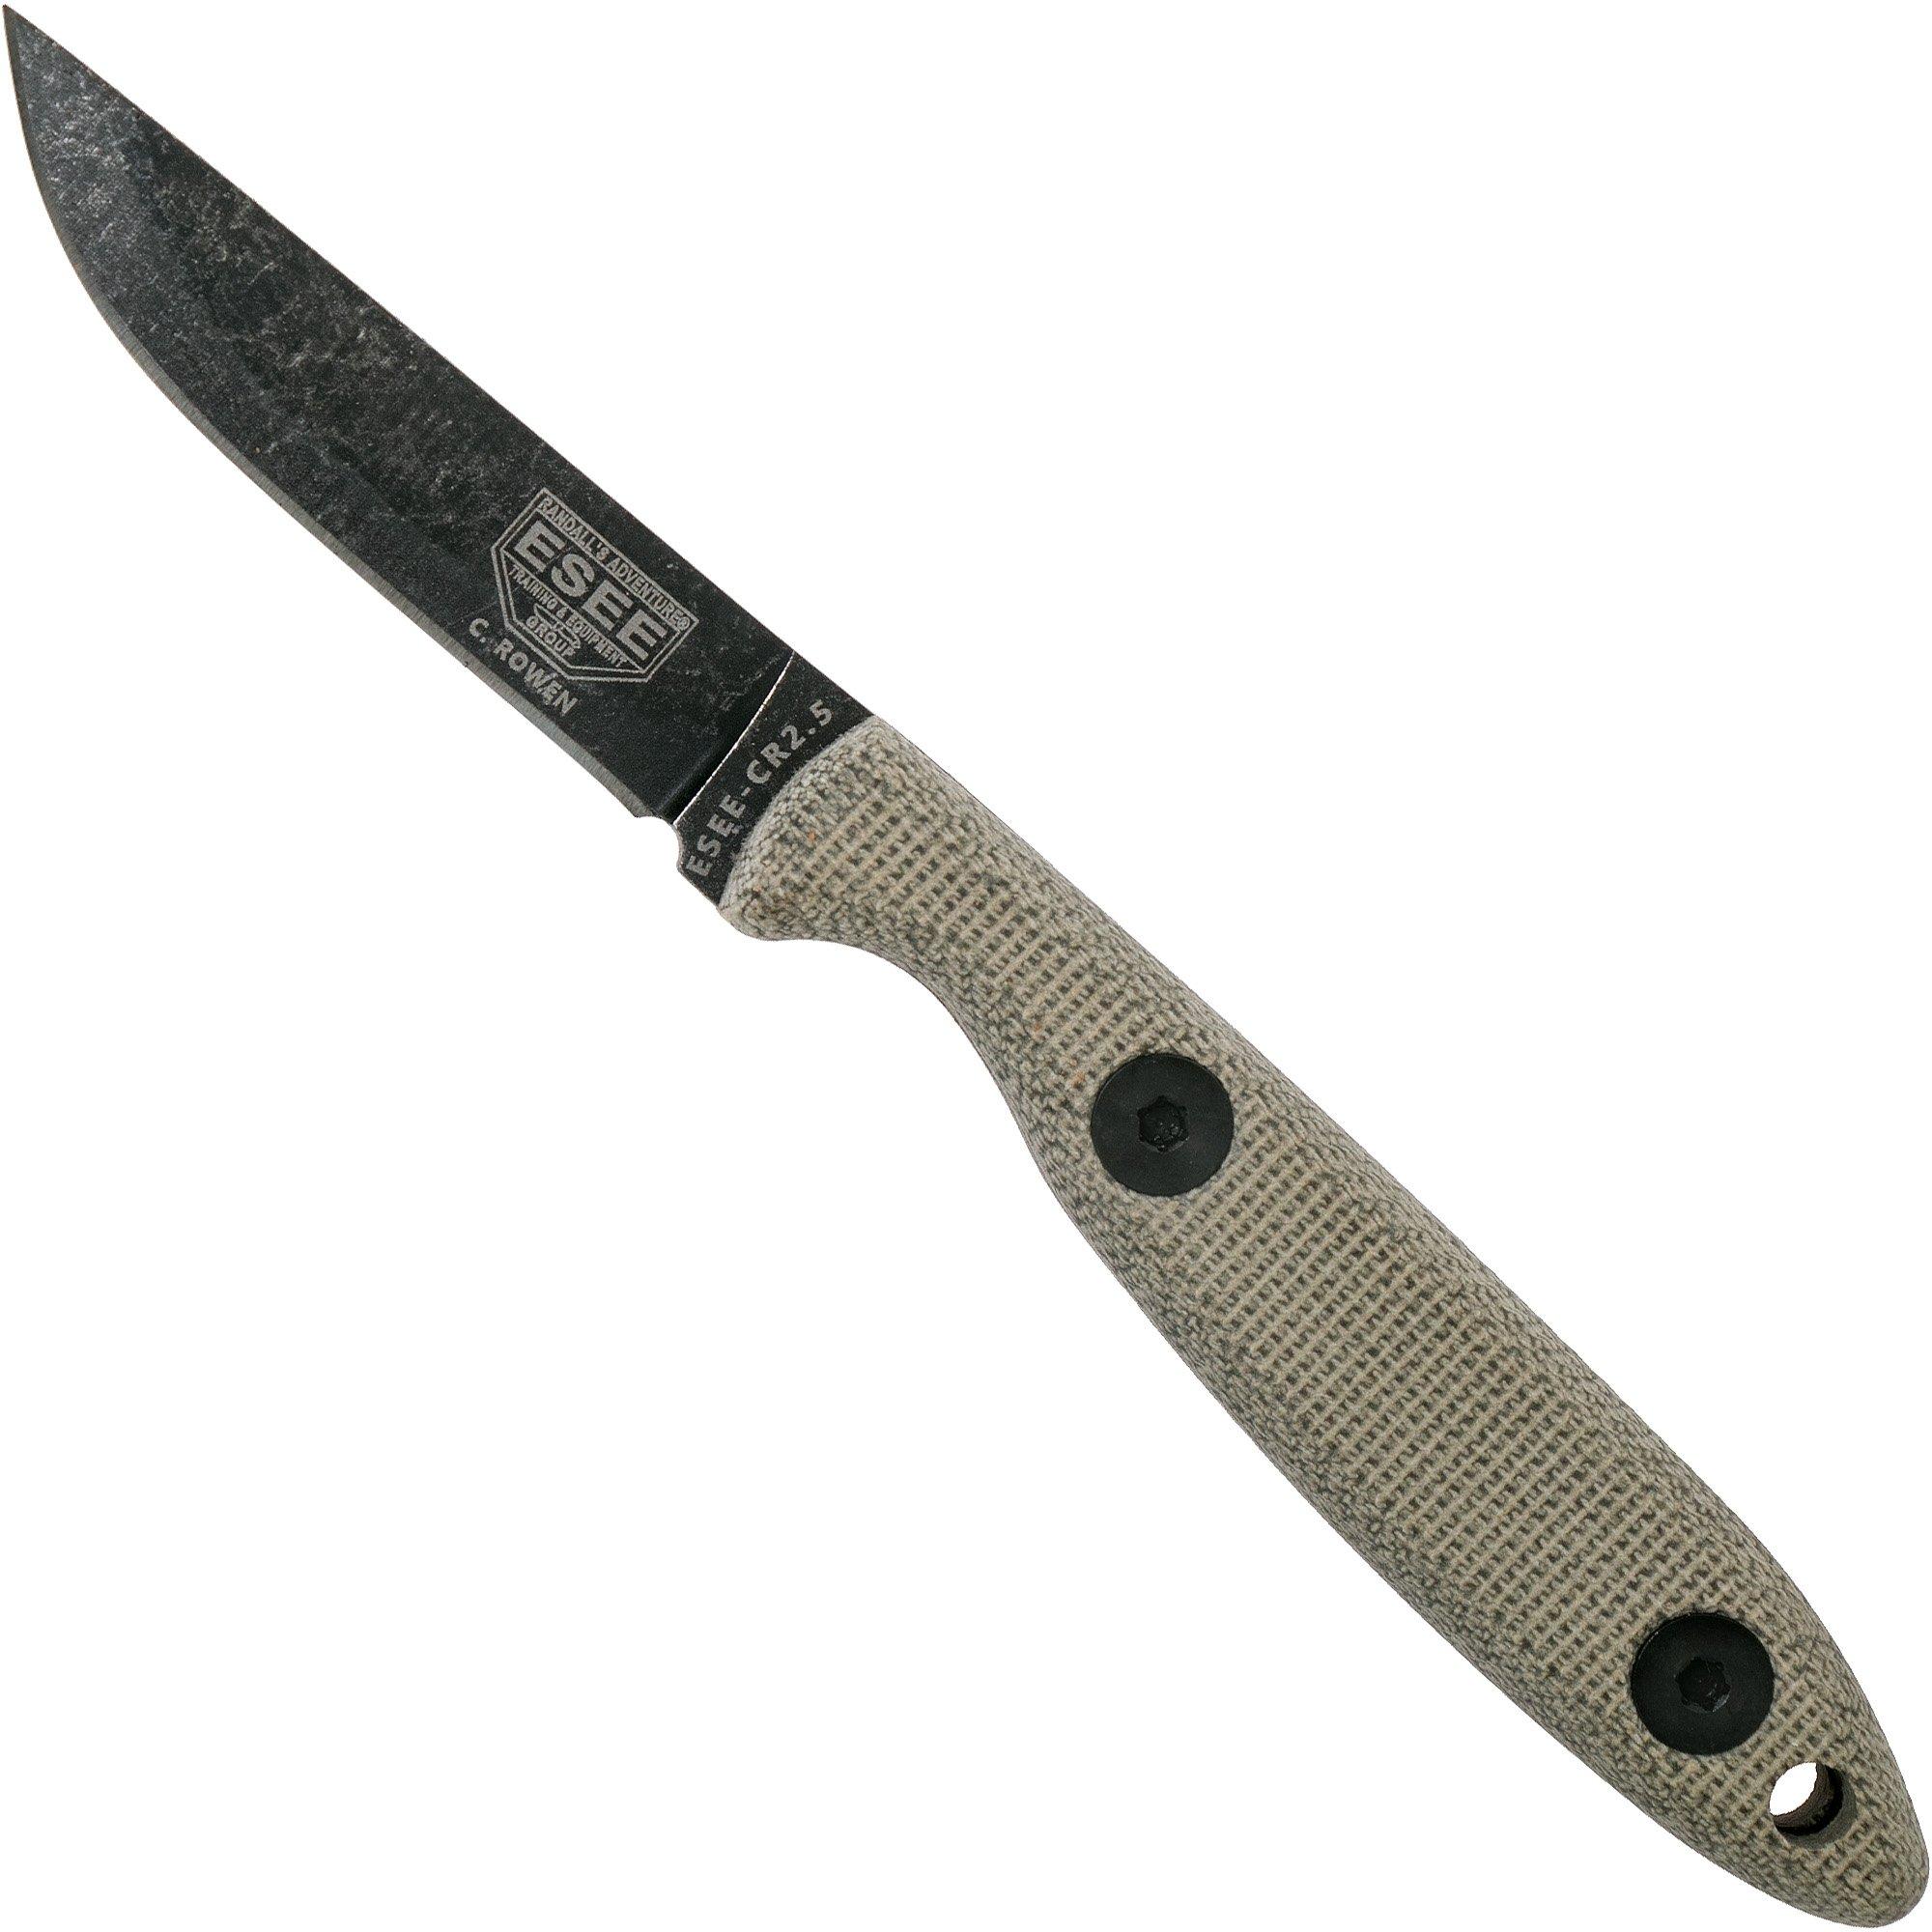  Fixed Blade Camping Knife, Stainless Steel Traning